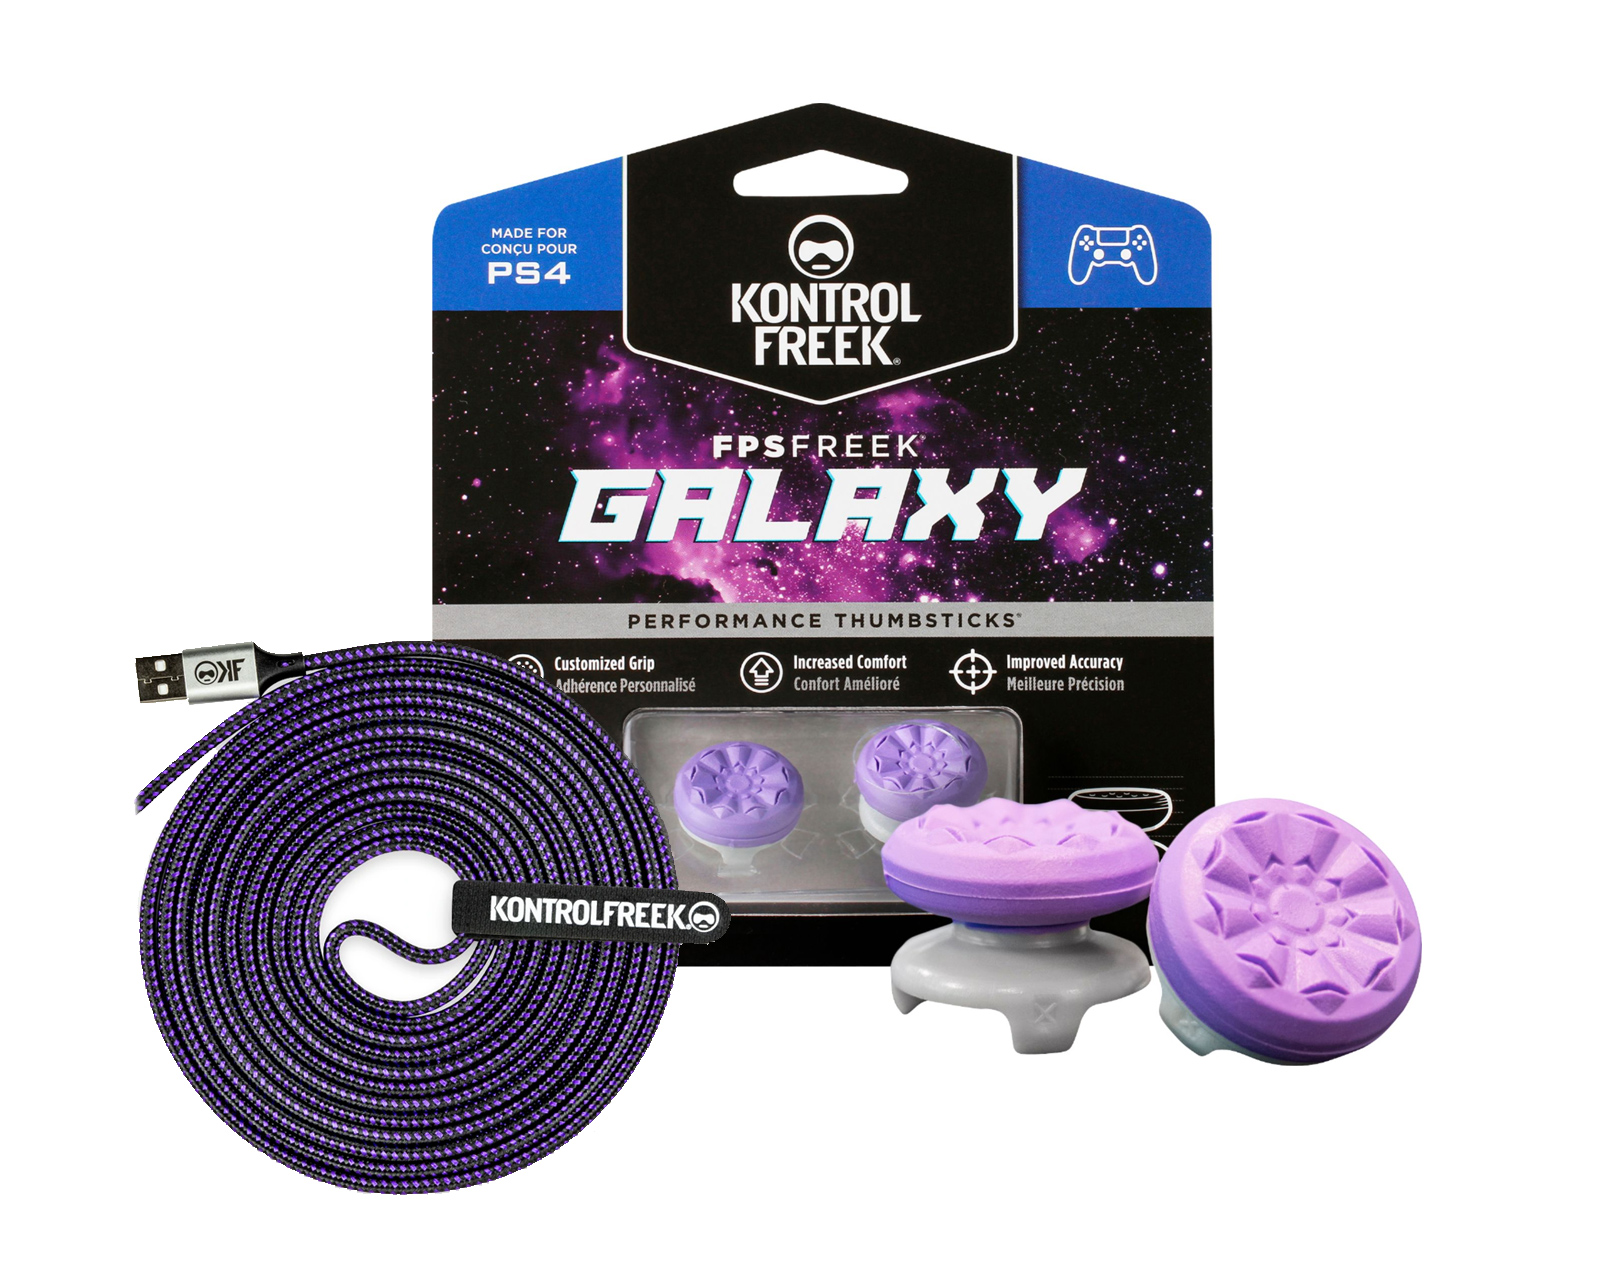 KontrolFreek FPS Aim Boost Kit for PS5 and PS4 RP-2807-PS5 - Best Buy